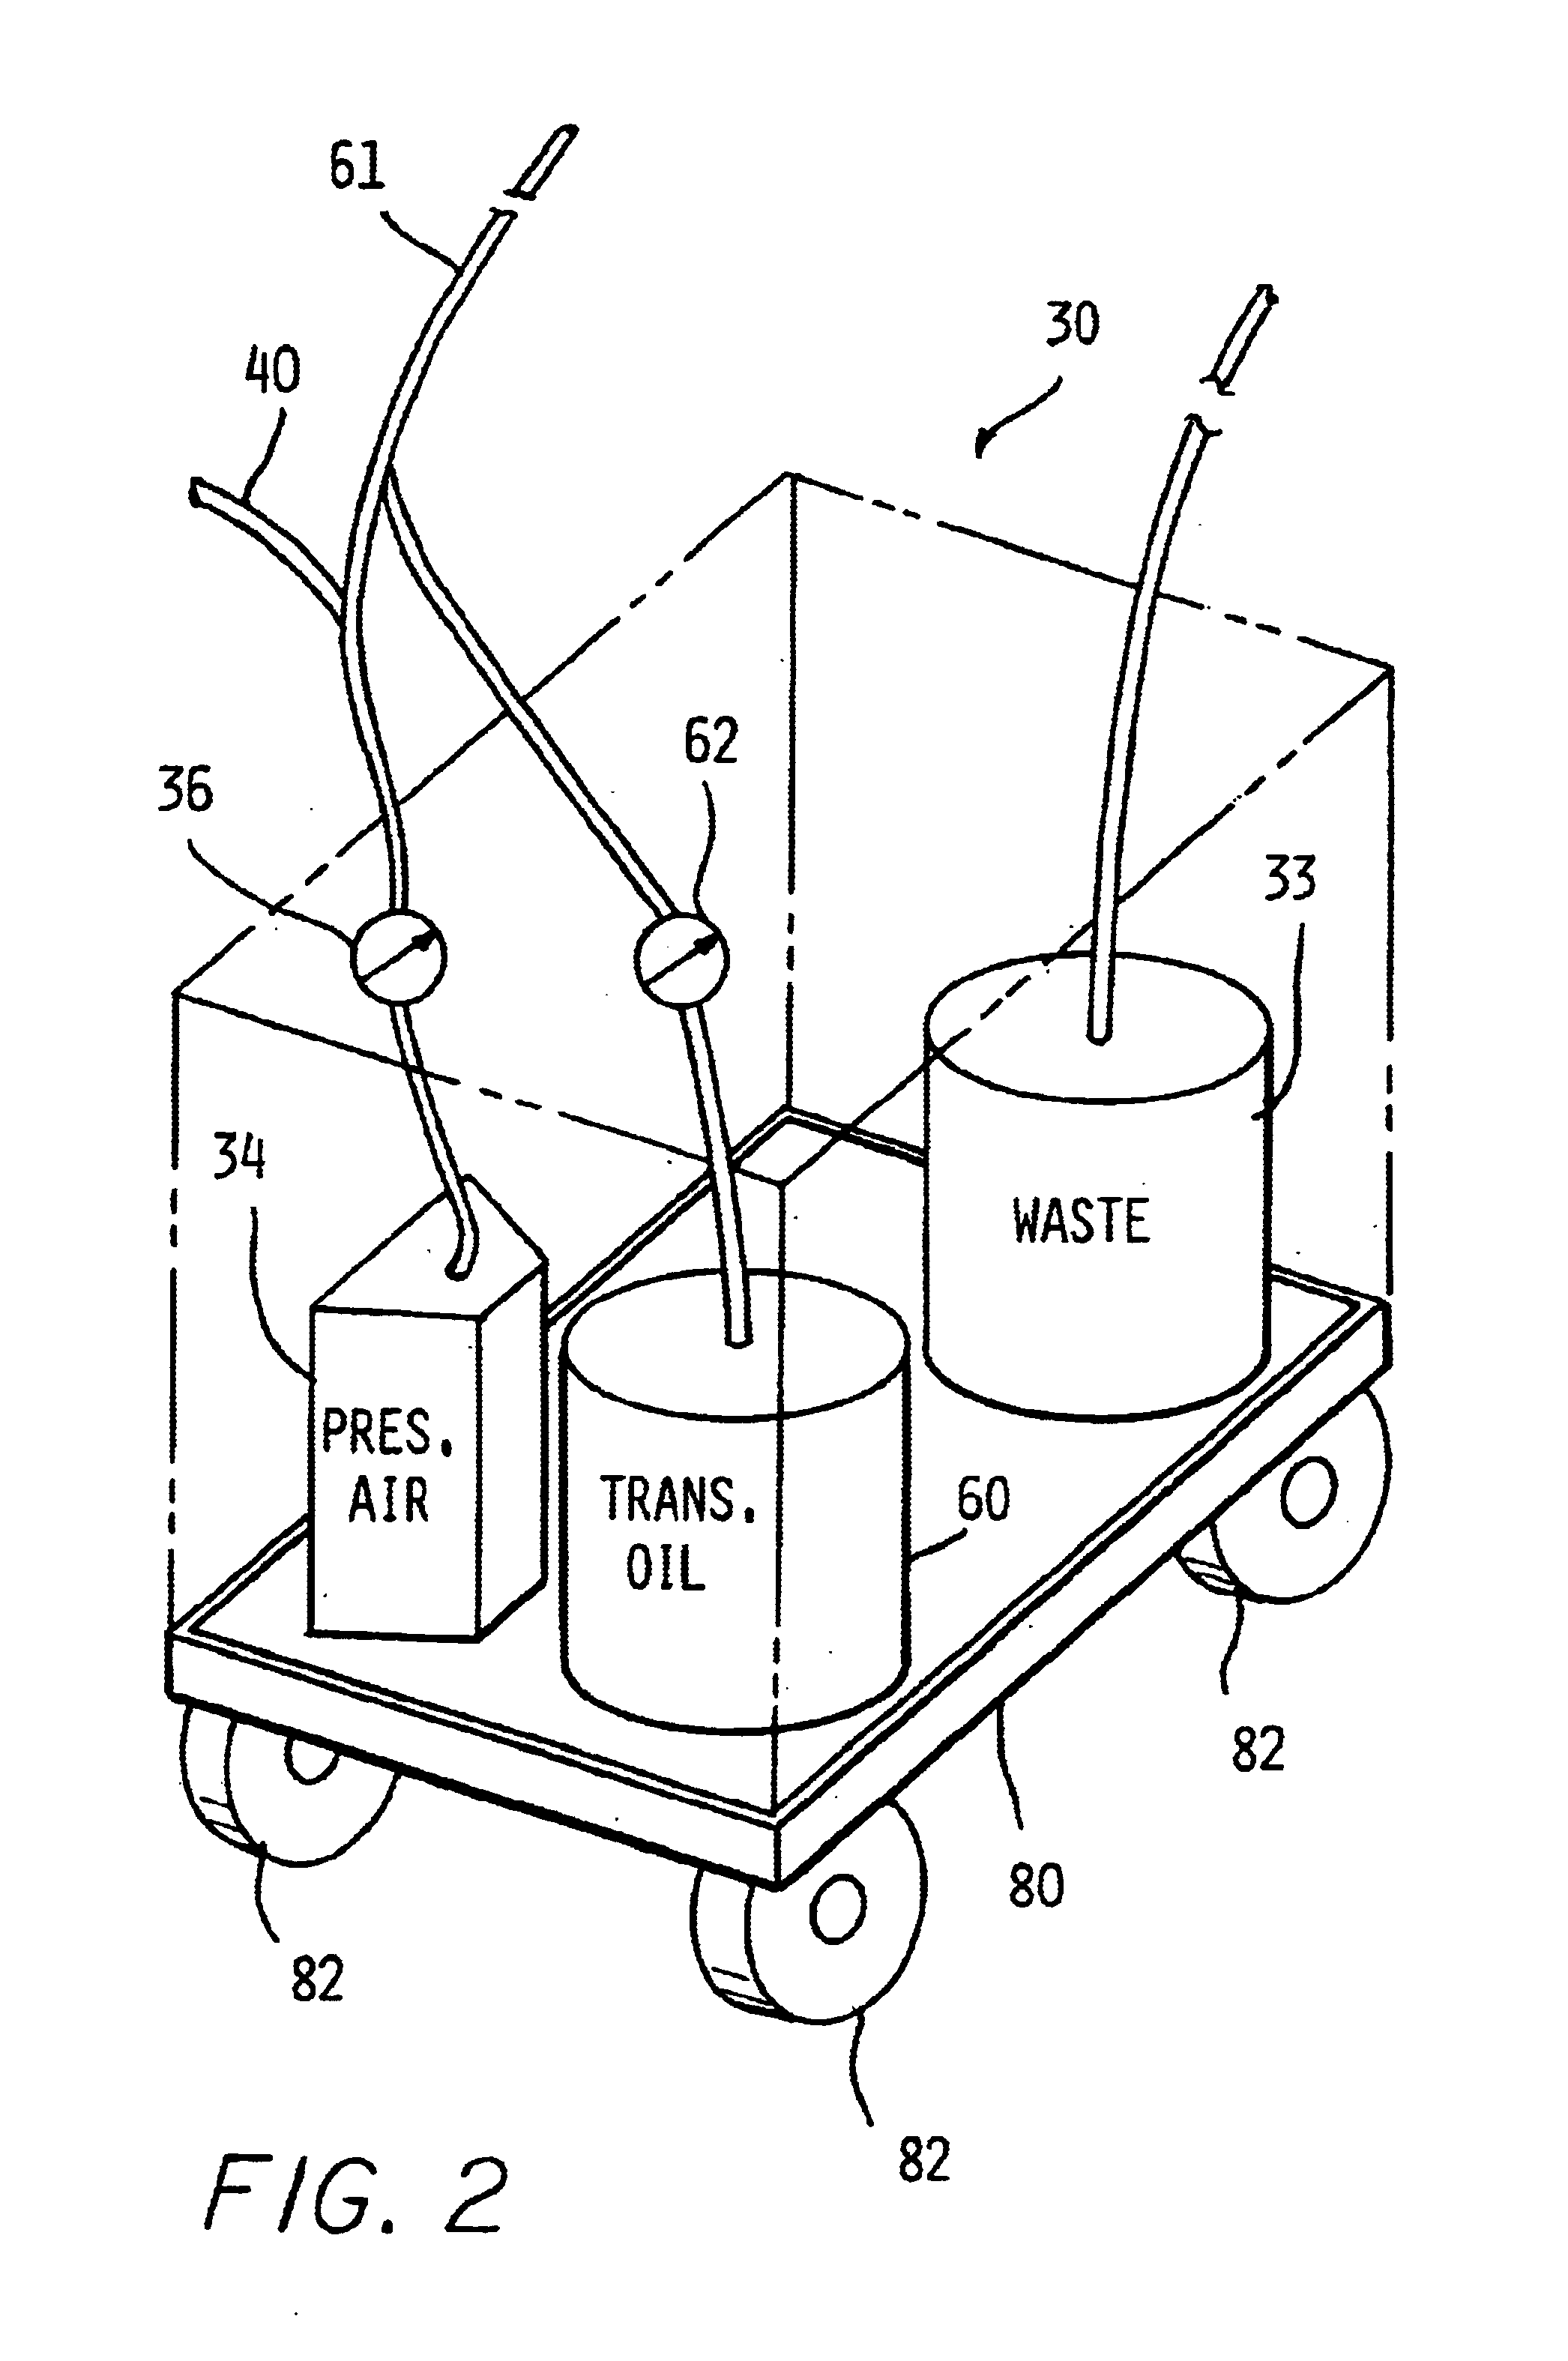 Method and apparatus for removing transmission fluid from fluid reservoir and associated fluid cooler with optional fluid replacement